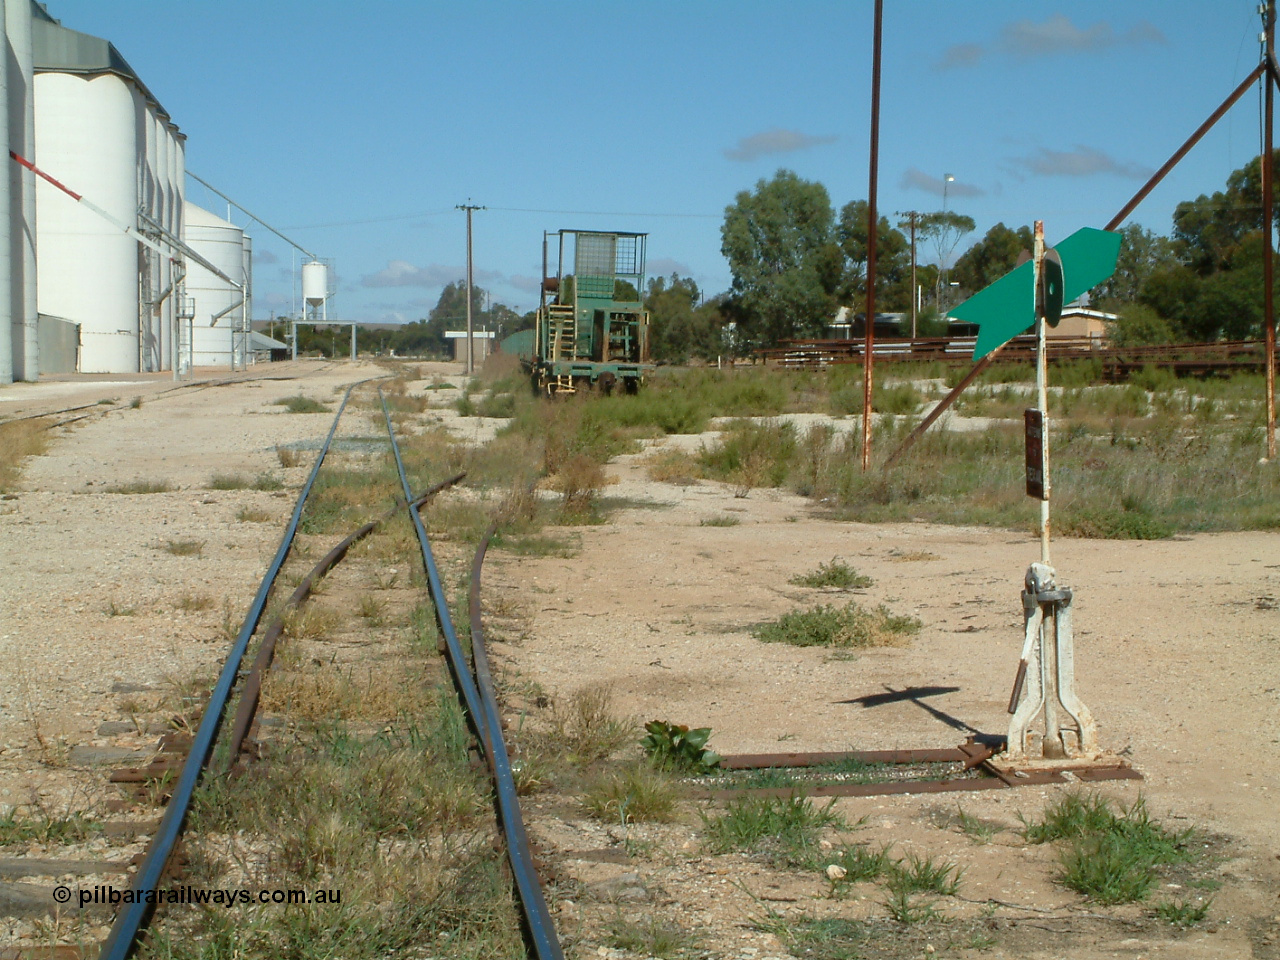 030411 105828
Kimba, station yard, view of rail transport set in the loading road, winch waggon, dumbbell point indicator. Barracks visible behind indicator, station building in the distance.
